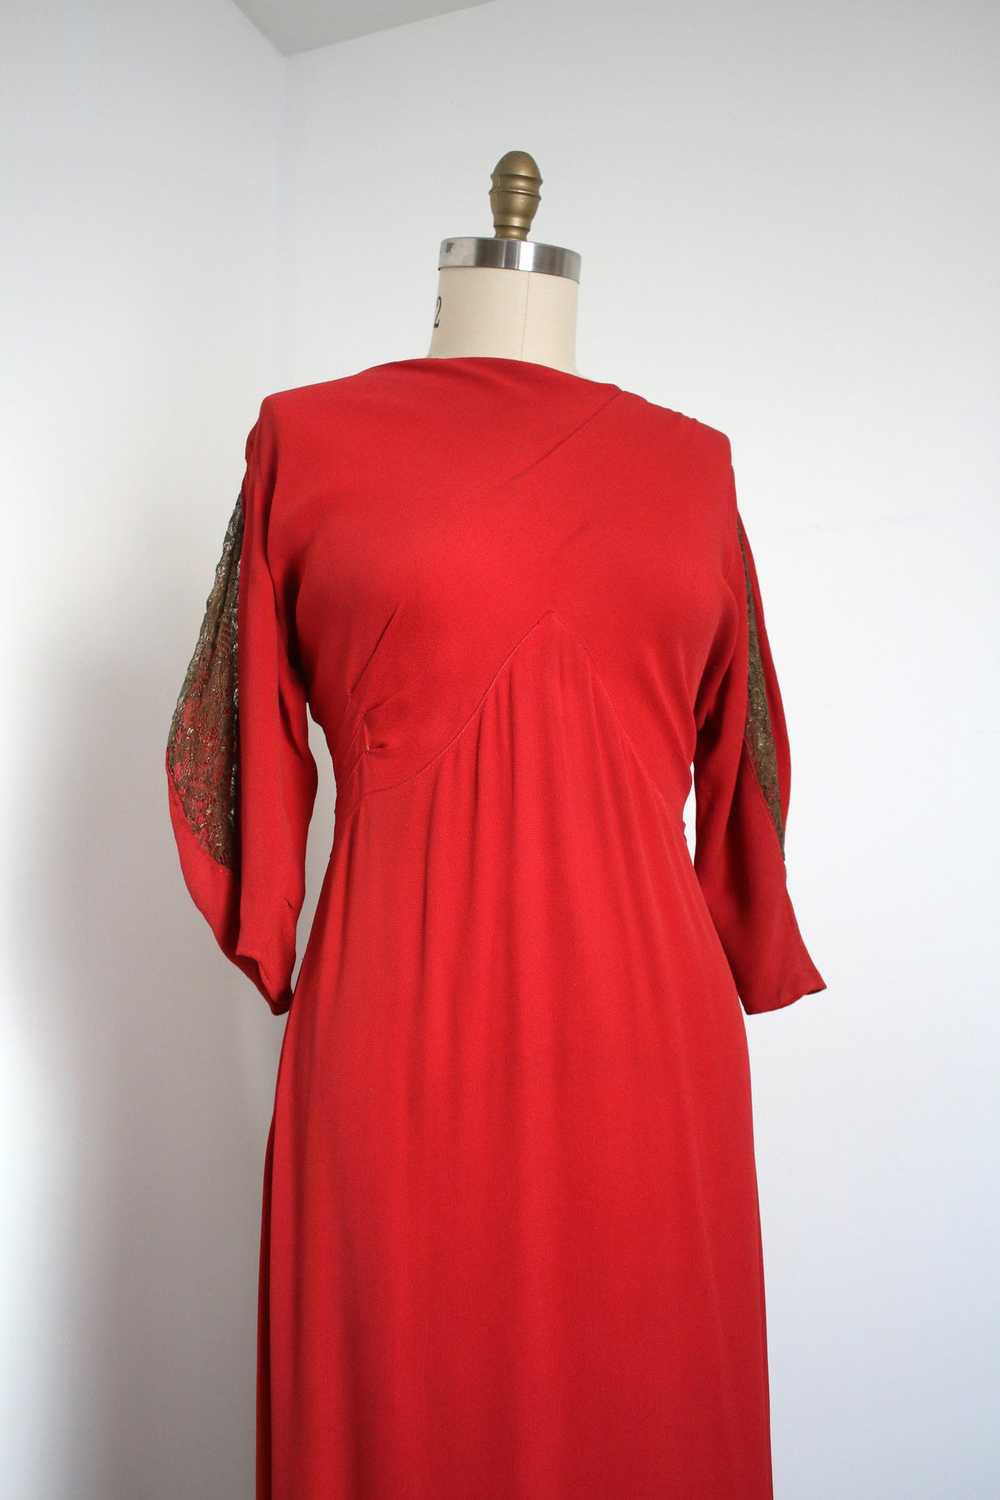 MARKED DOWN vintage 1930s orange rayon gown - image 2